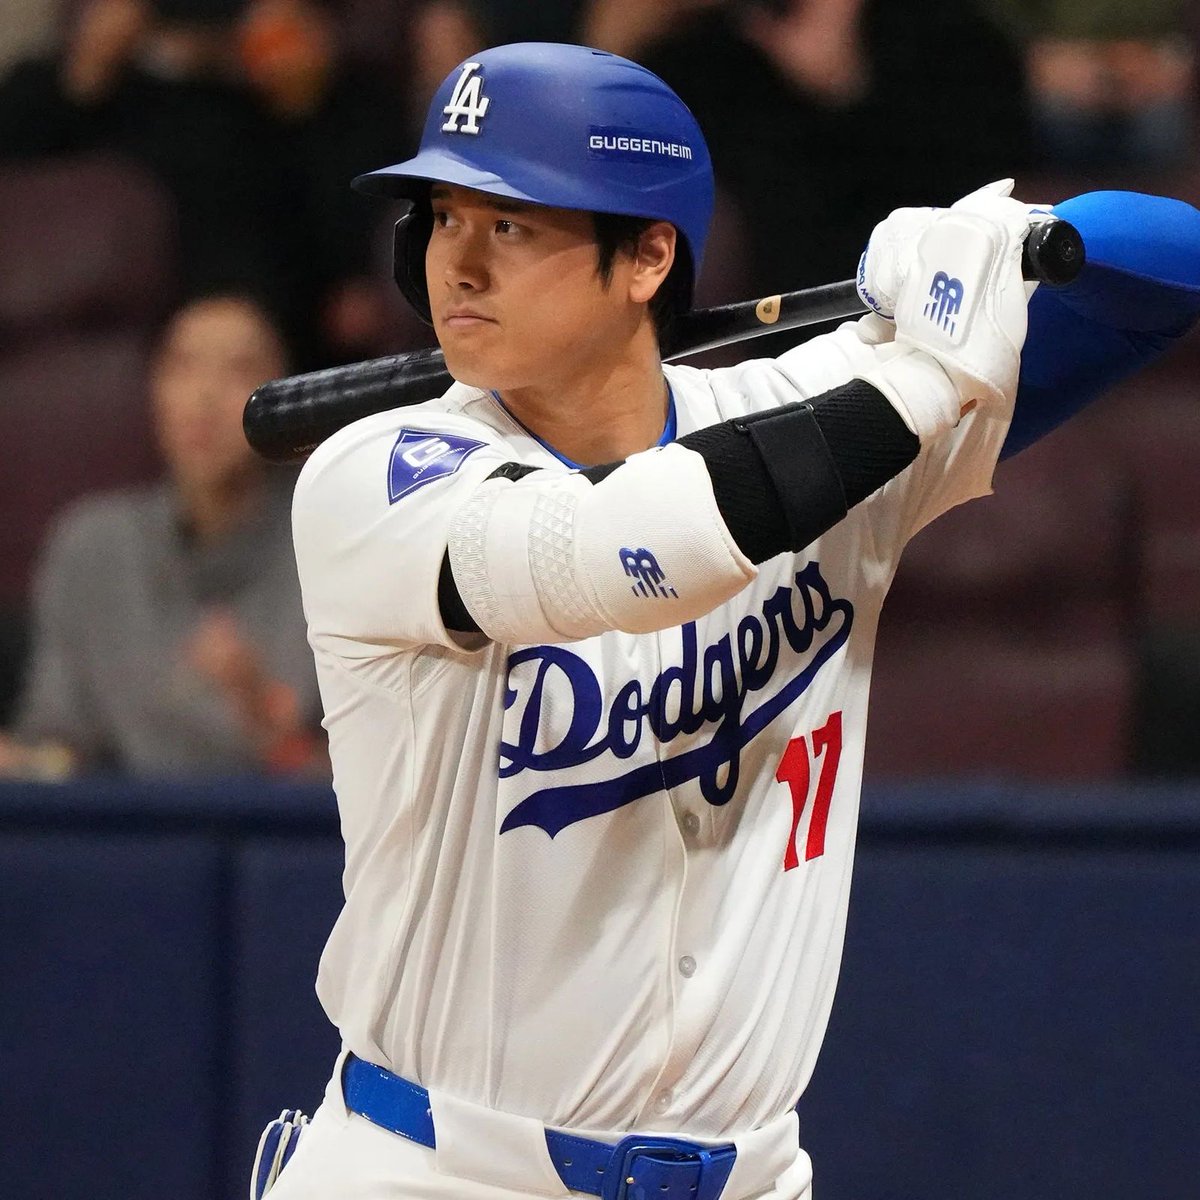 The 2024 @MLB season is nearly at the one-quarter mark. It's gone very well for #Dodgers w Shohei, Mookie, & Will Smith leading the way. Freddie Freeman plays there too. How has the 1st quarter gone for your team?